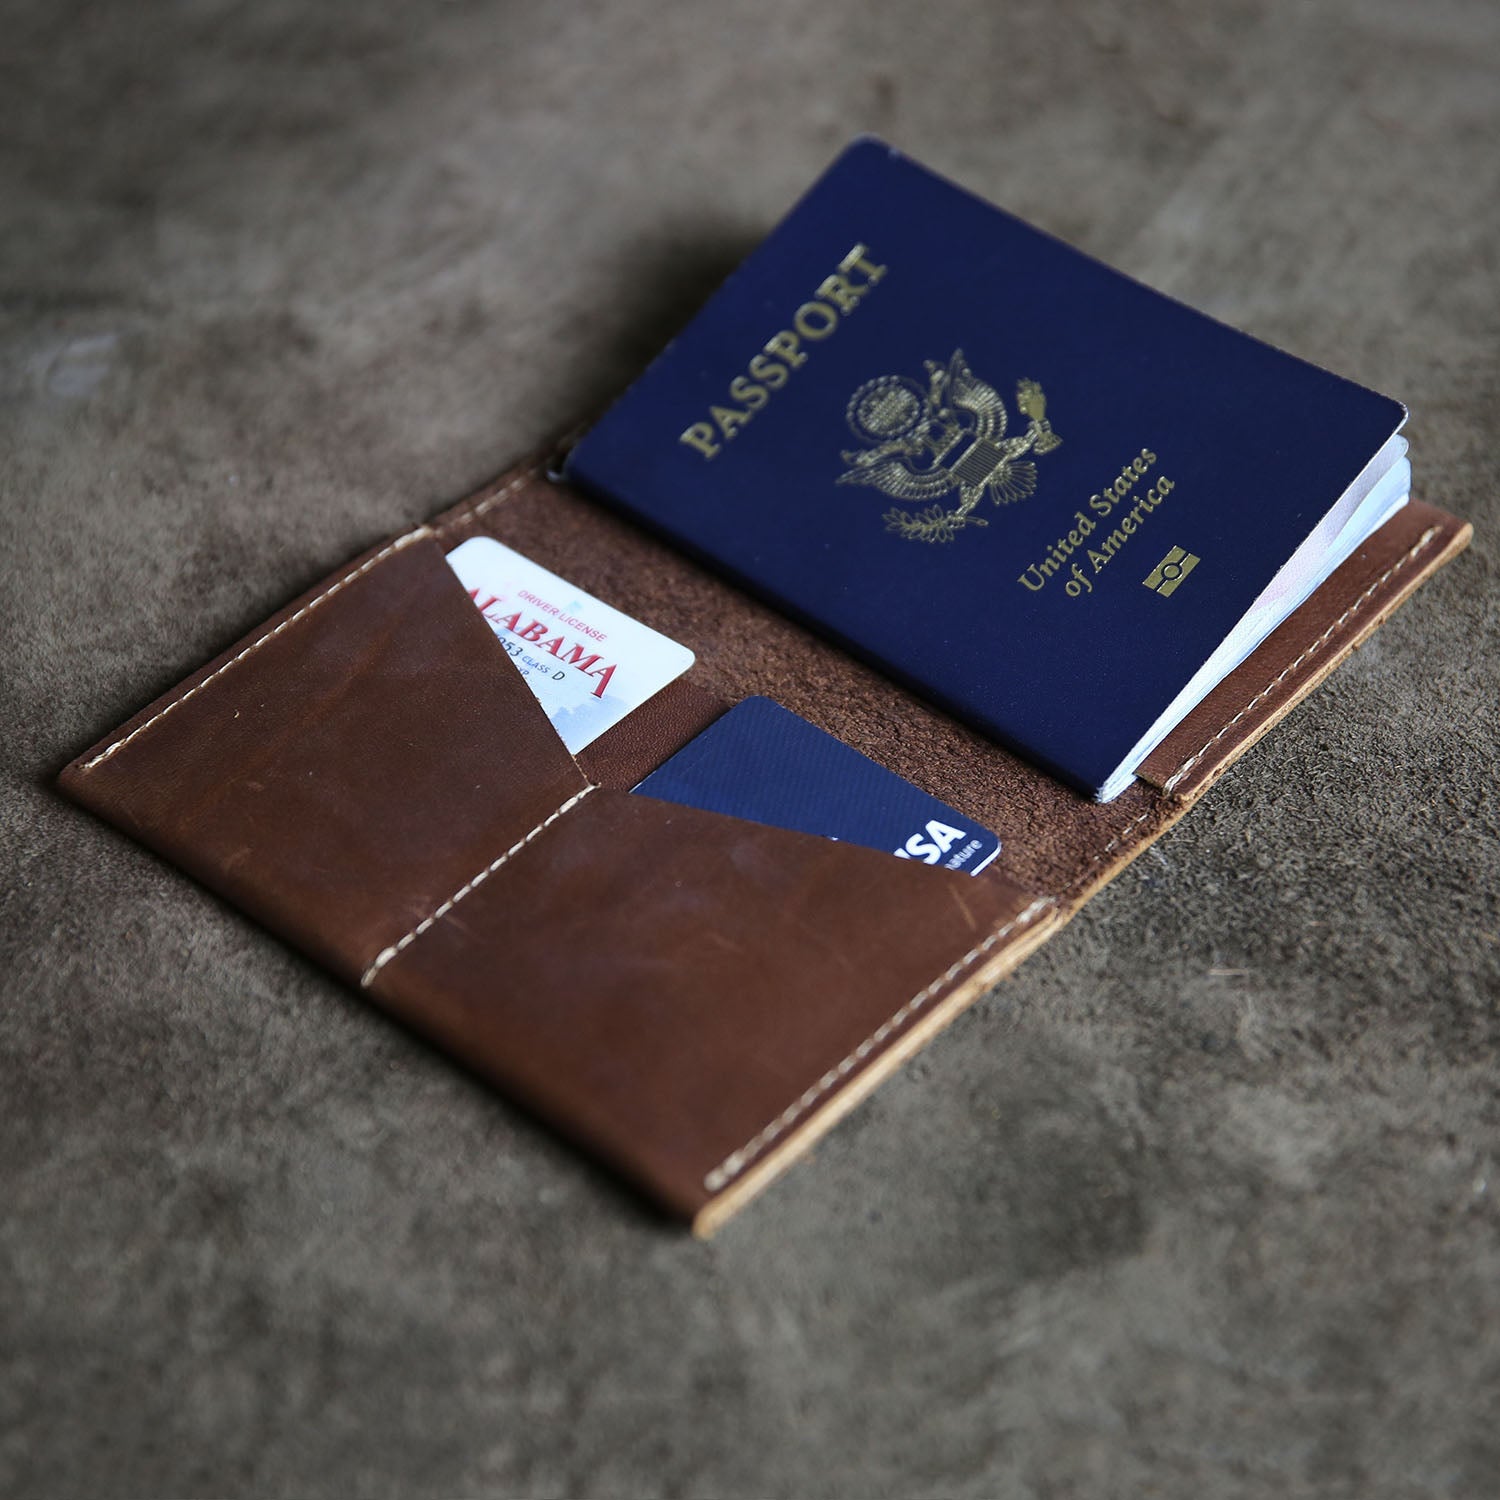 Fine American leather passport cover and wallet with a customized logo on the front